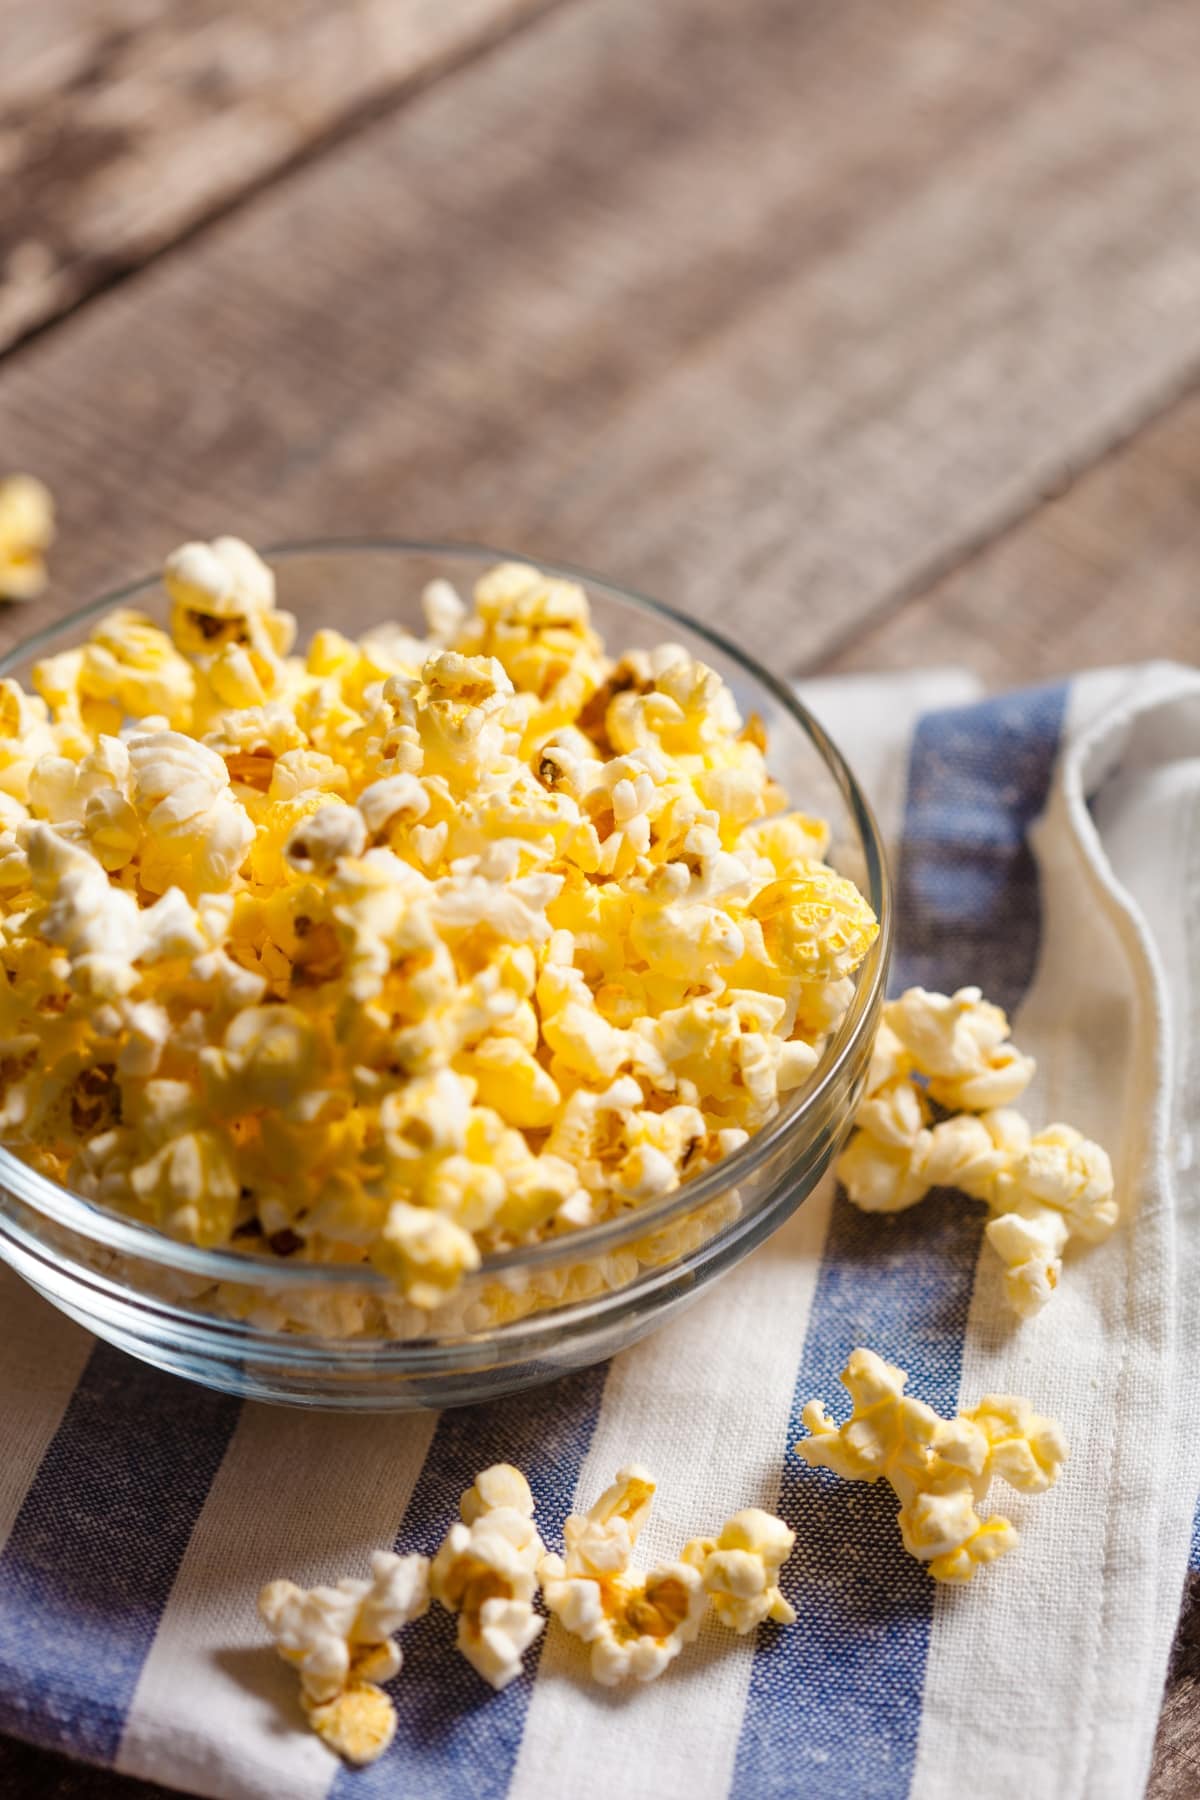 The Best Popcorn Toppings- 15 Ideas To Try featuring Homemade Popcorn in a Glass Bowl on a Wooden Table with a Blue and White Dishcloth